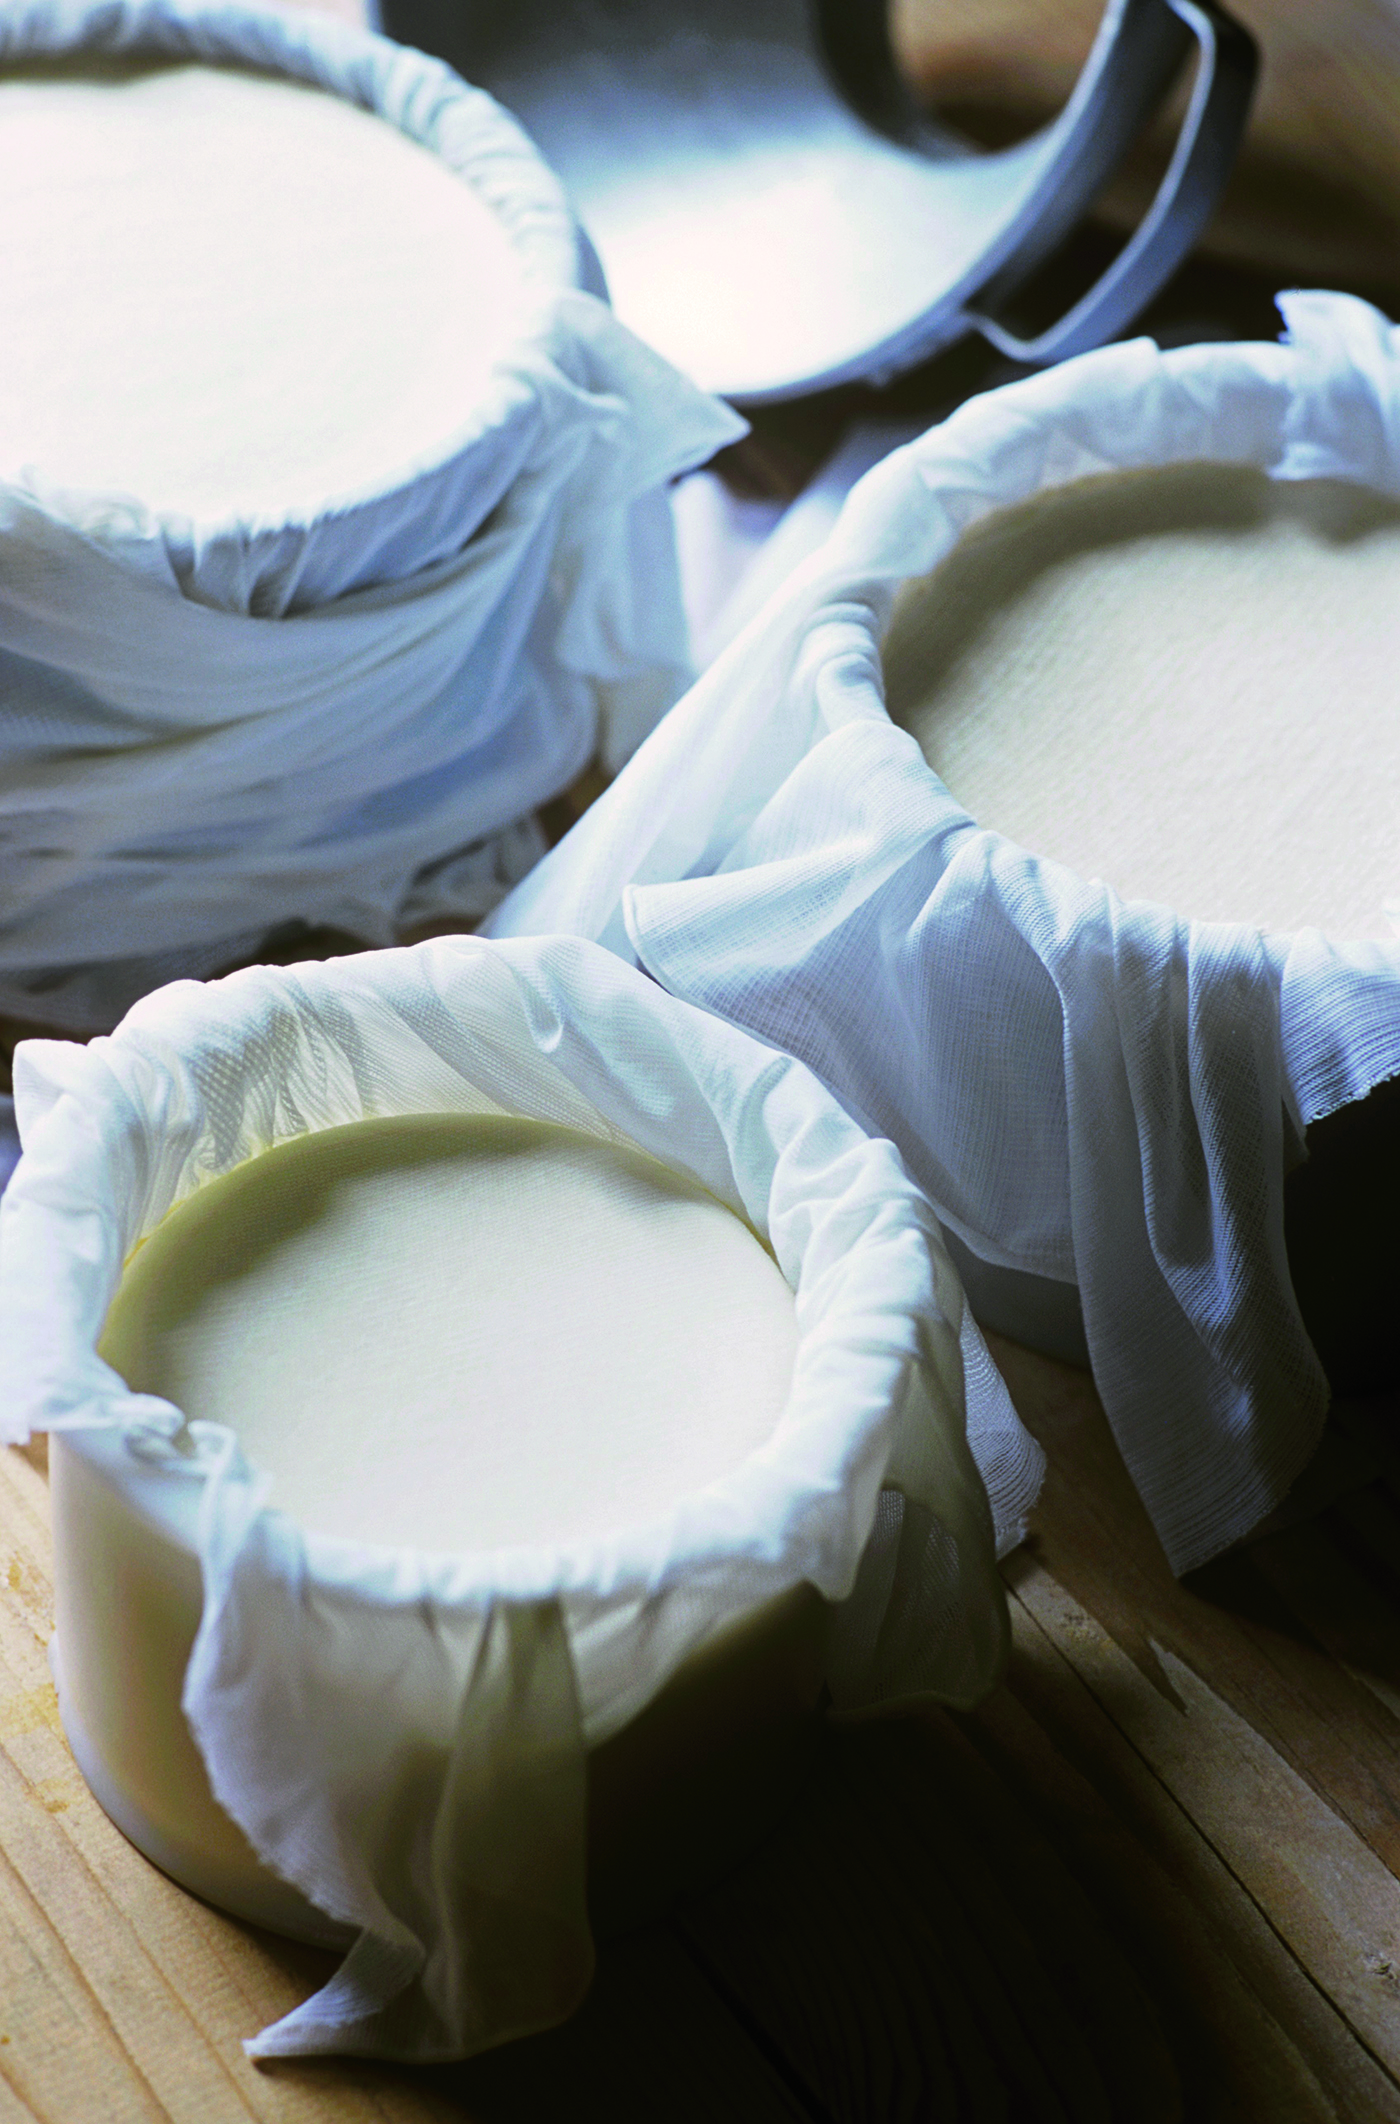 Cheese curds rest in muslin cloths inside round molds. Several New England dairy farms and educational venues offer courses  in cheesemaking for home cooks.